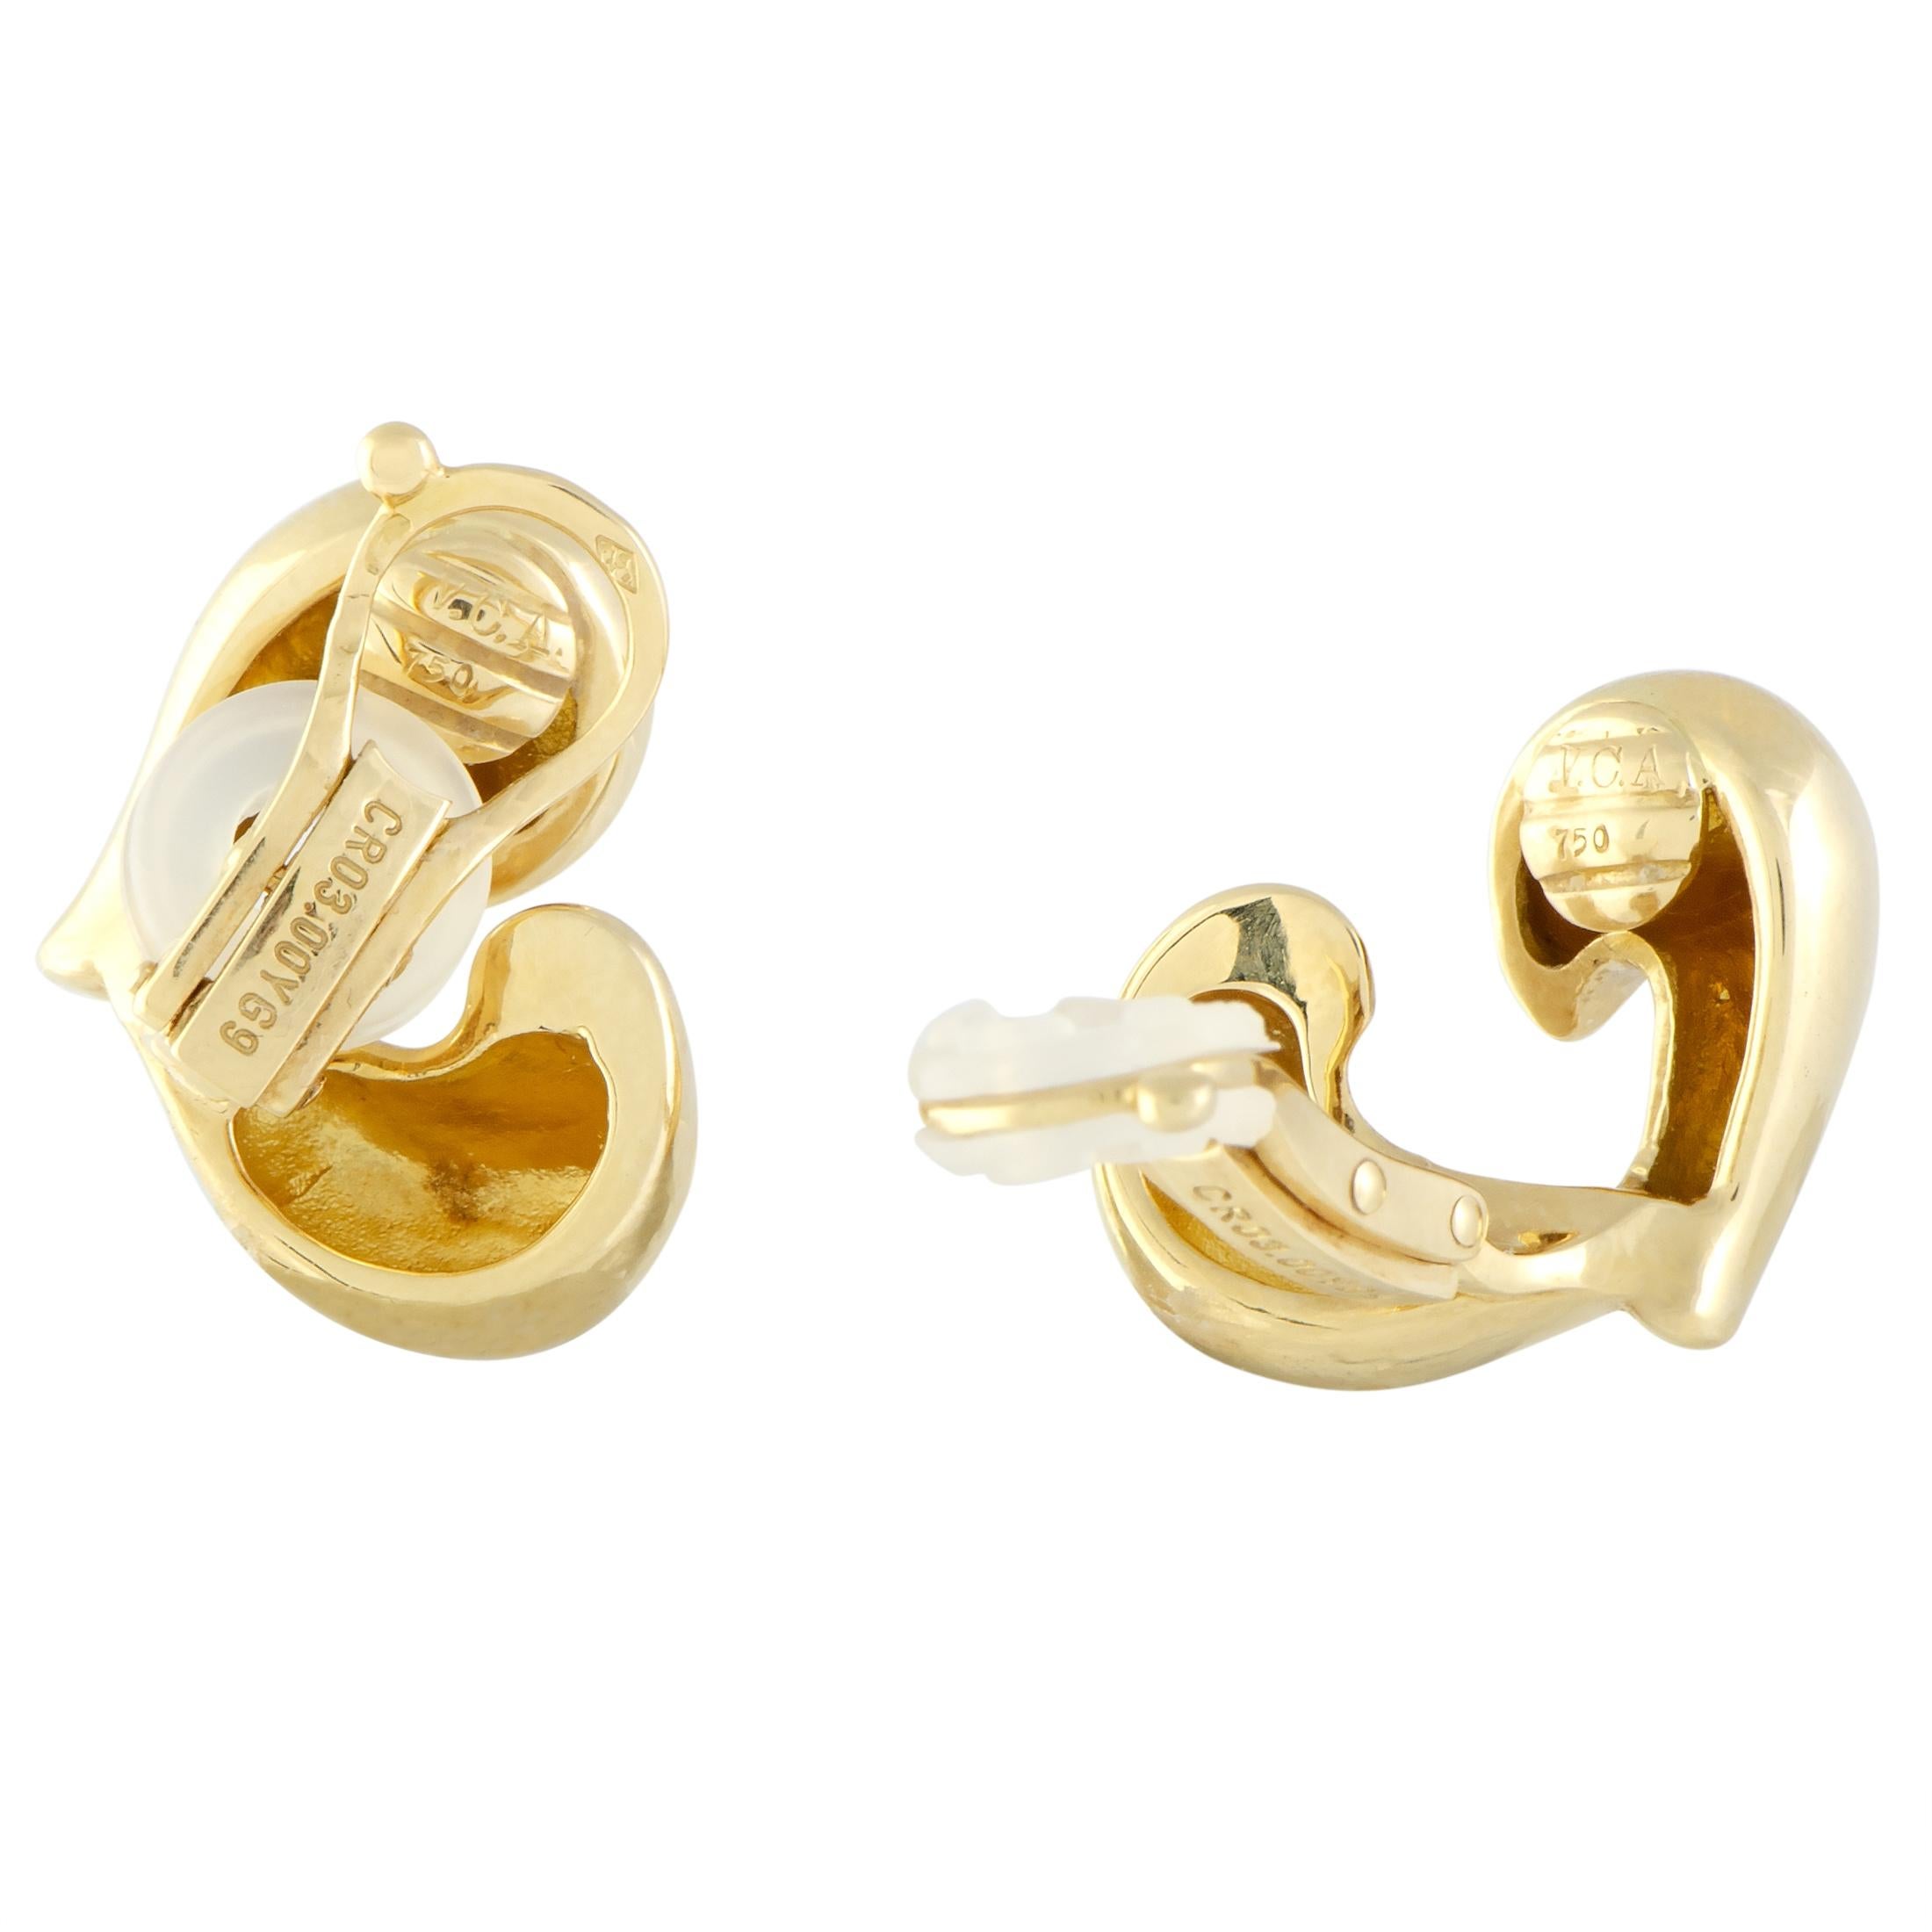 Crafted entirely from gracefully shaped and flawlessly polished 18K yellow gold that lends its fabulously luxurious sheen to the slightly unconventional design, these marvelous vintage earrings from Van Cleef & Arpels boast the adorable heart motif